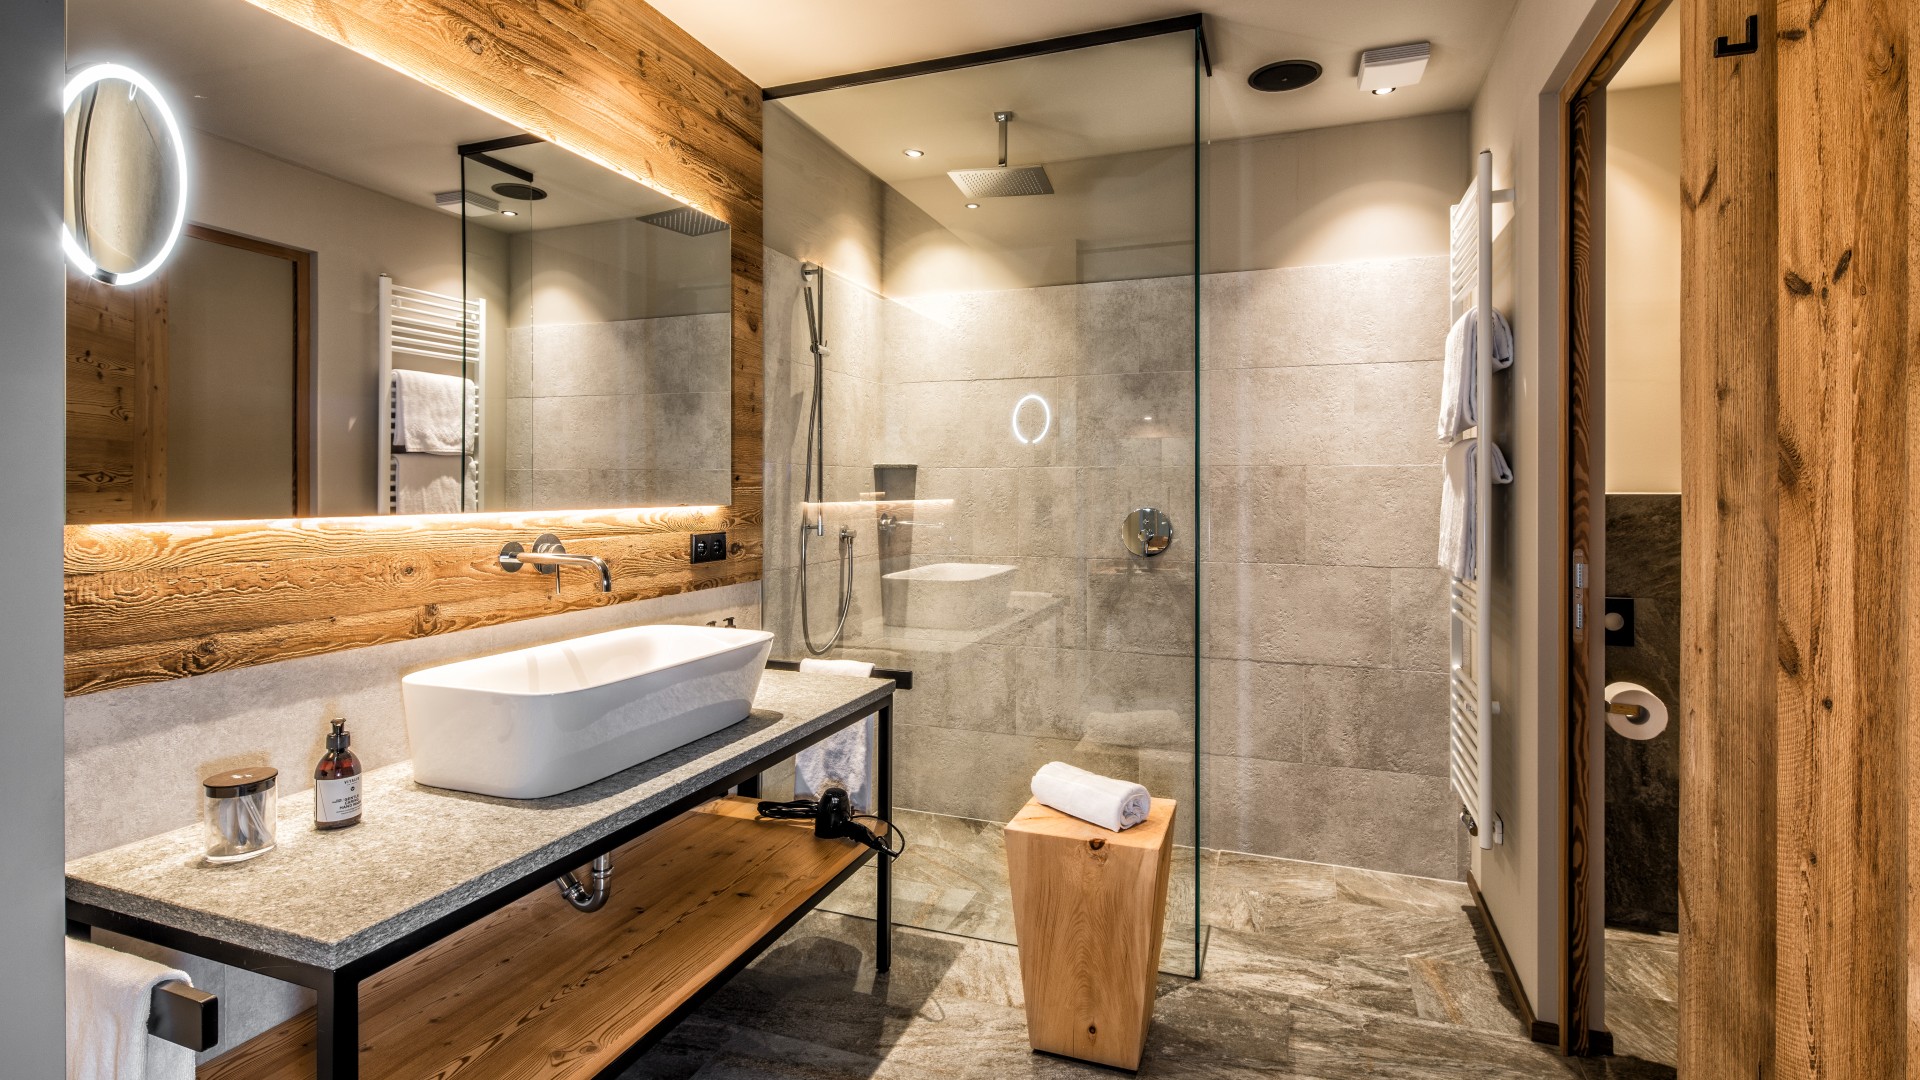 Interior shot of a bathroom in a standard room at the My Arbor treetop hotel in the Dolomites